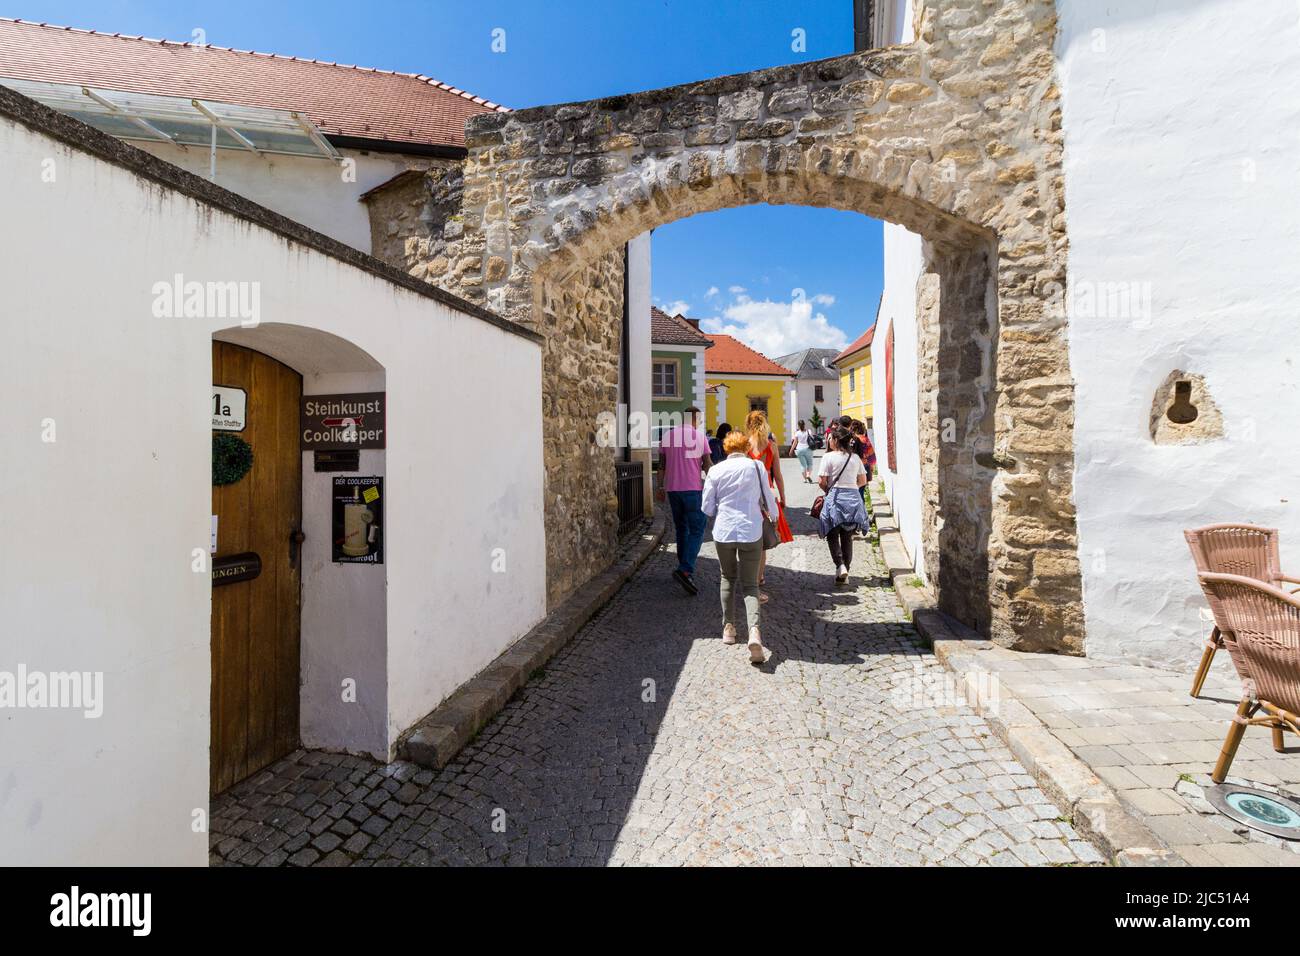 People walking through old town gate of the wall around Rust am See (build in 1512), Rust, Burgenland, Austria Stock Photo